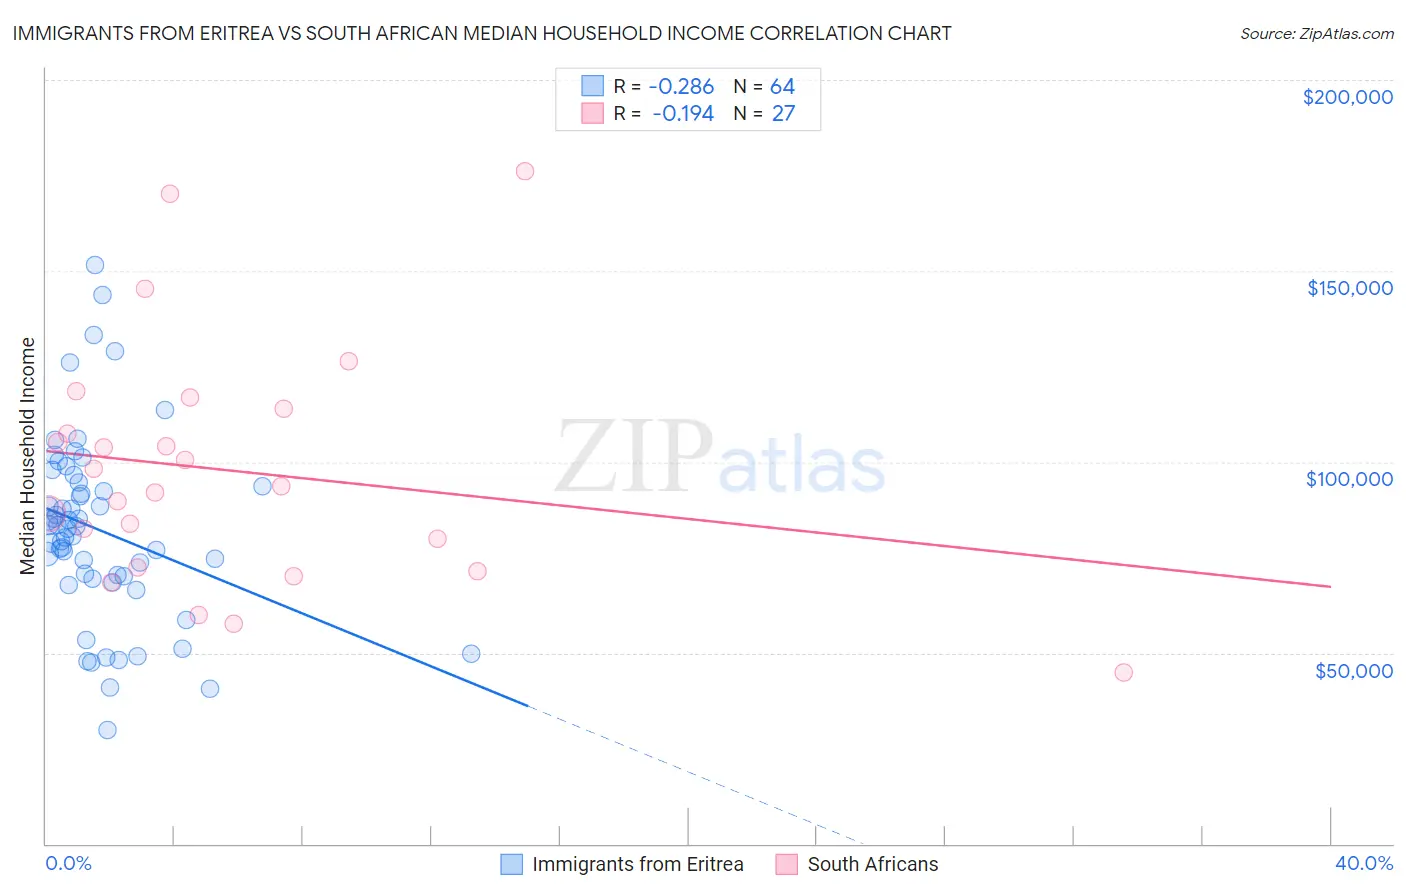 Immigrants from Eritrea vs South African Median Household Income